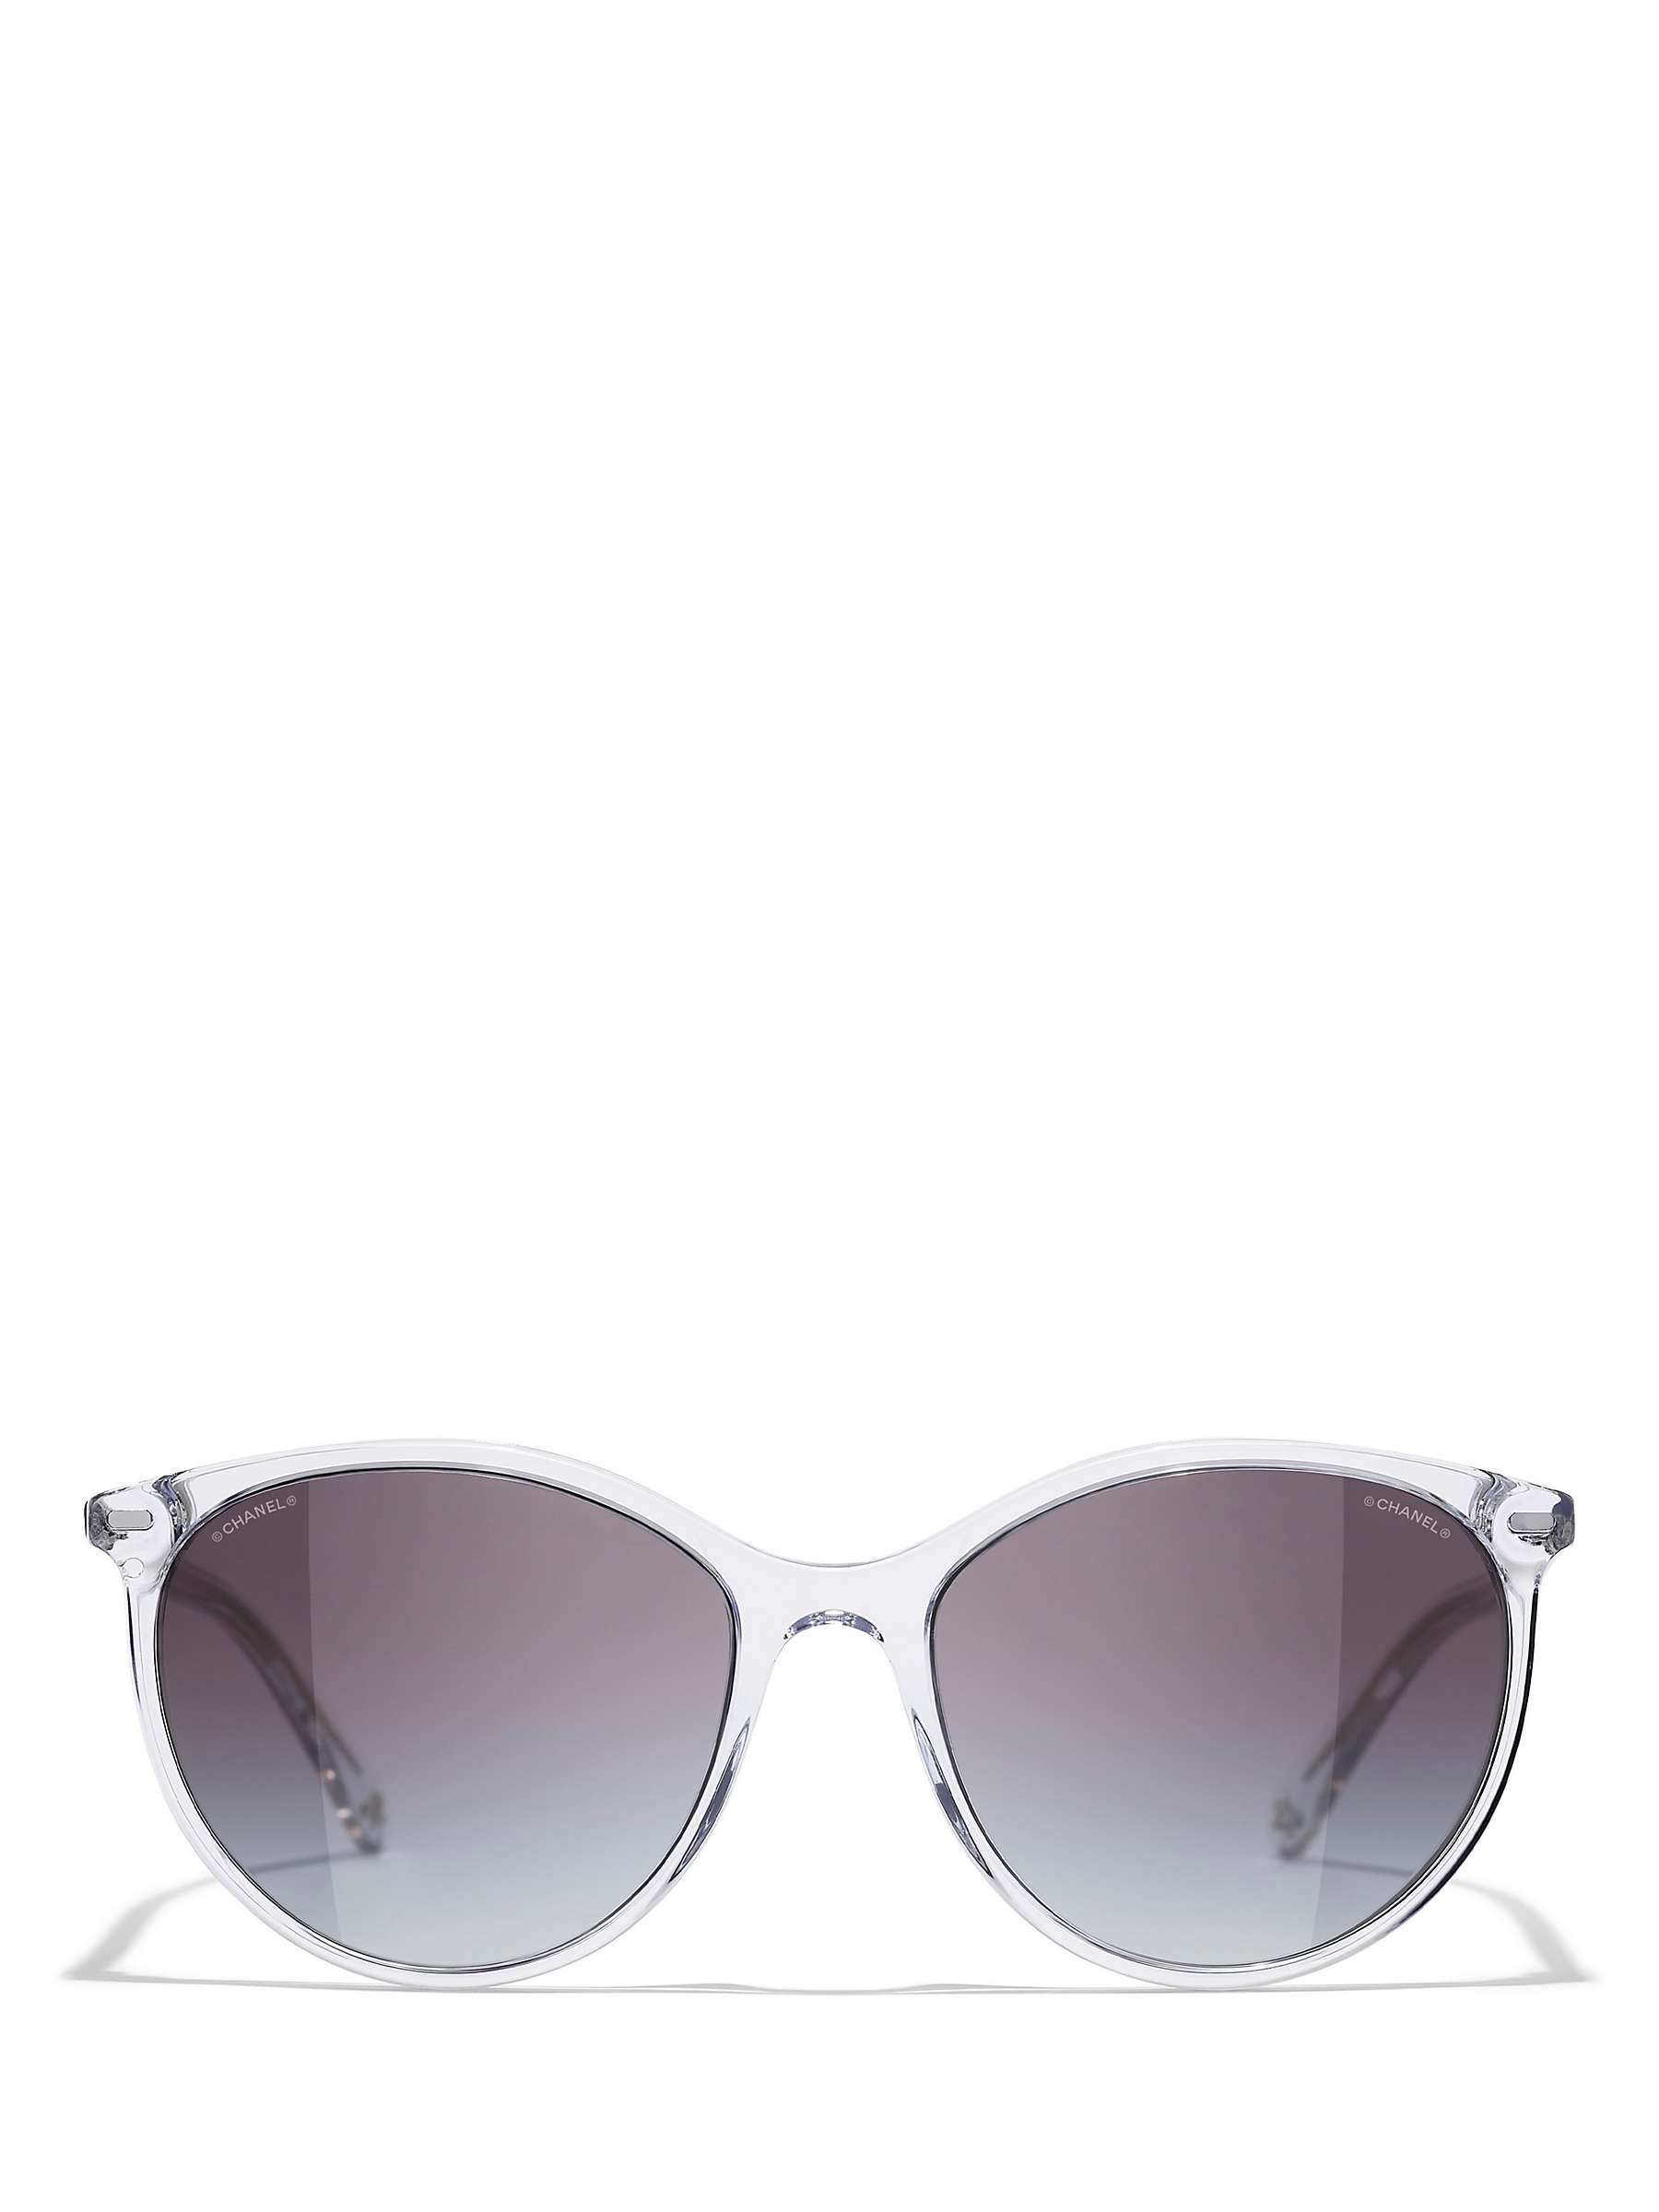 Buy CHANEL Oval Sunglasses CH5448 Clear/Blue Gradient Online at johnlewis.com